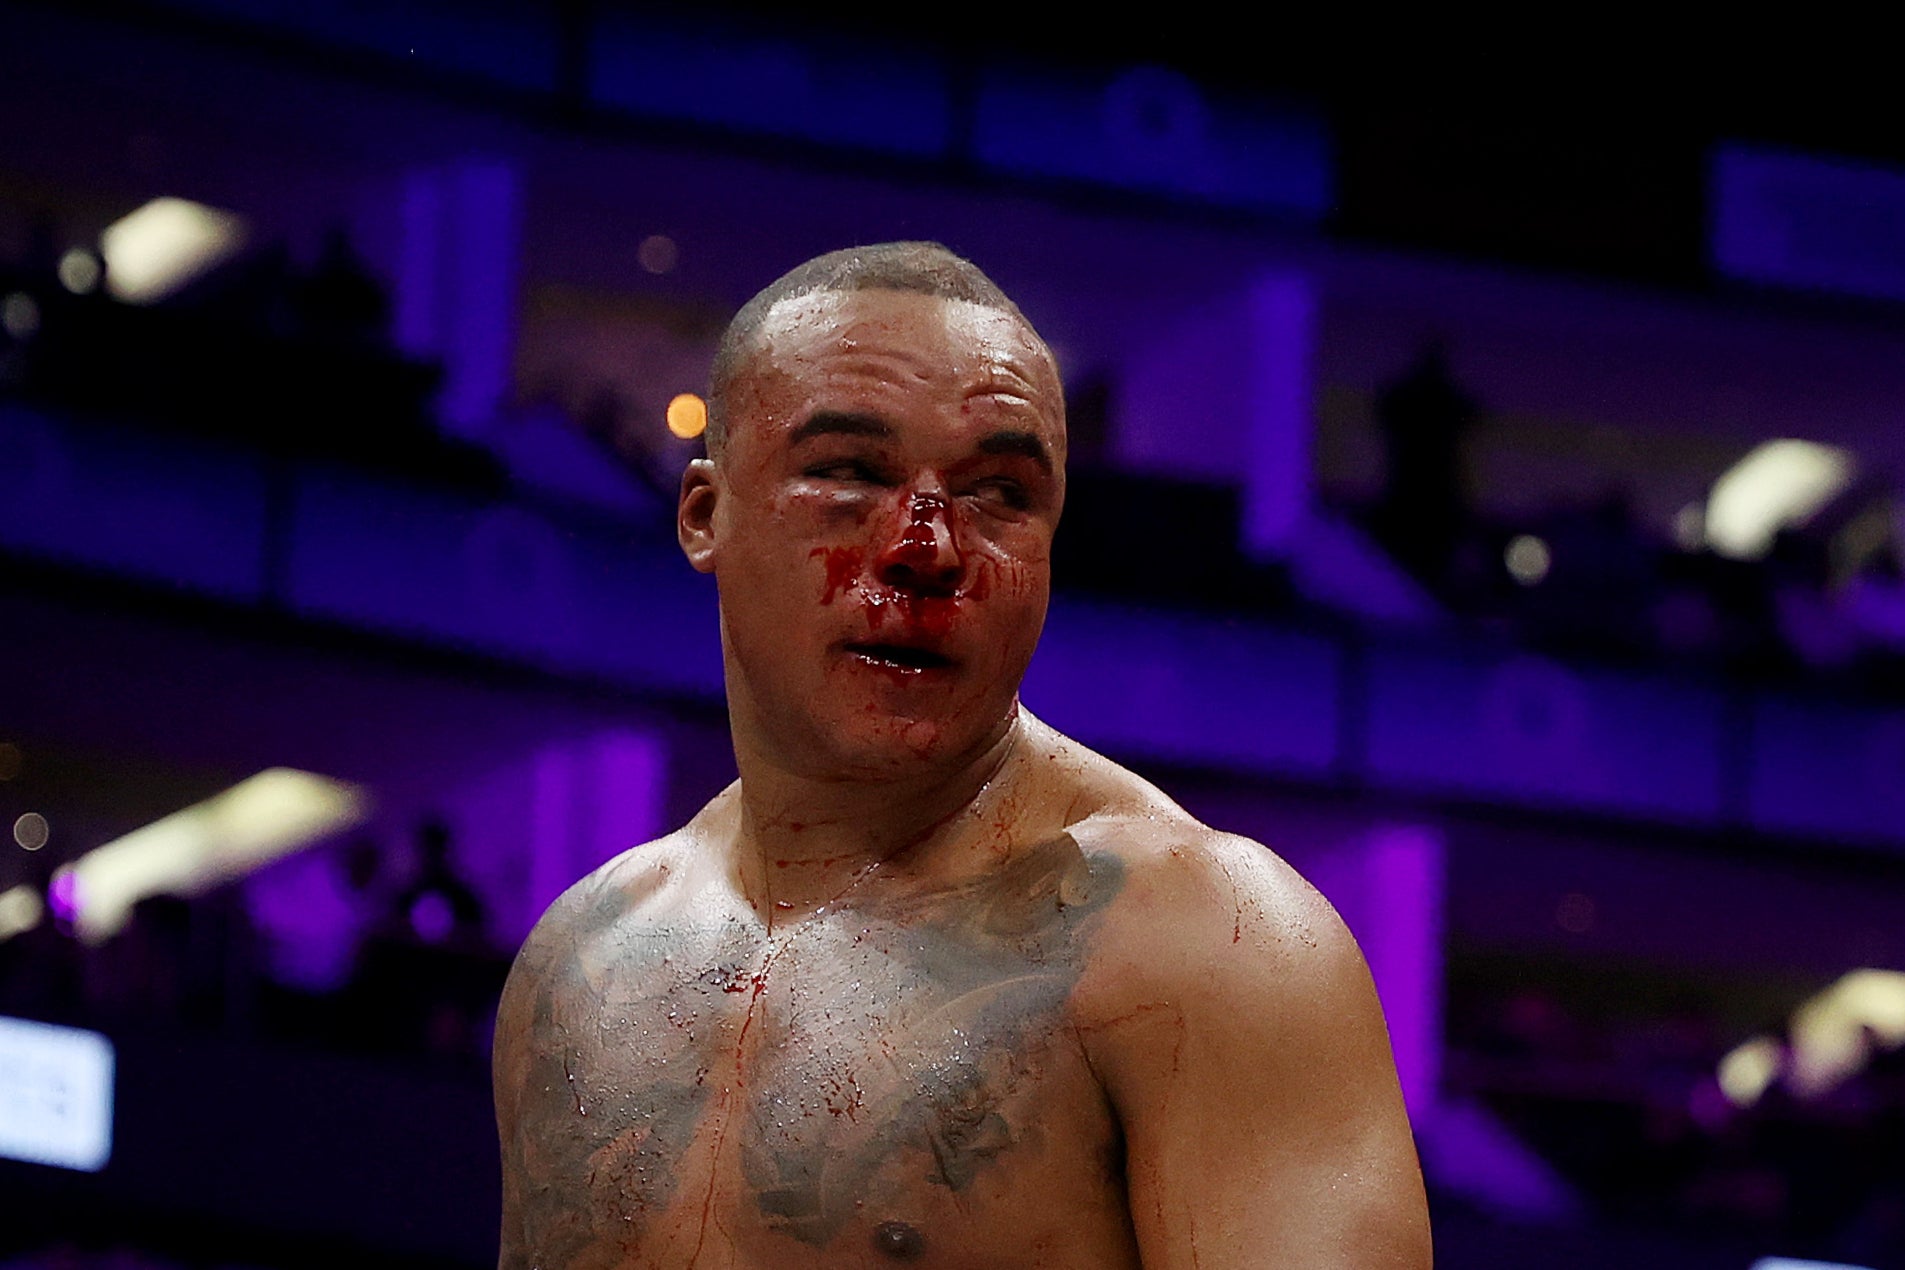 Wardley’s face was left a bloody mess, but he exited the O2 with his belts